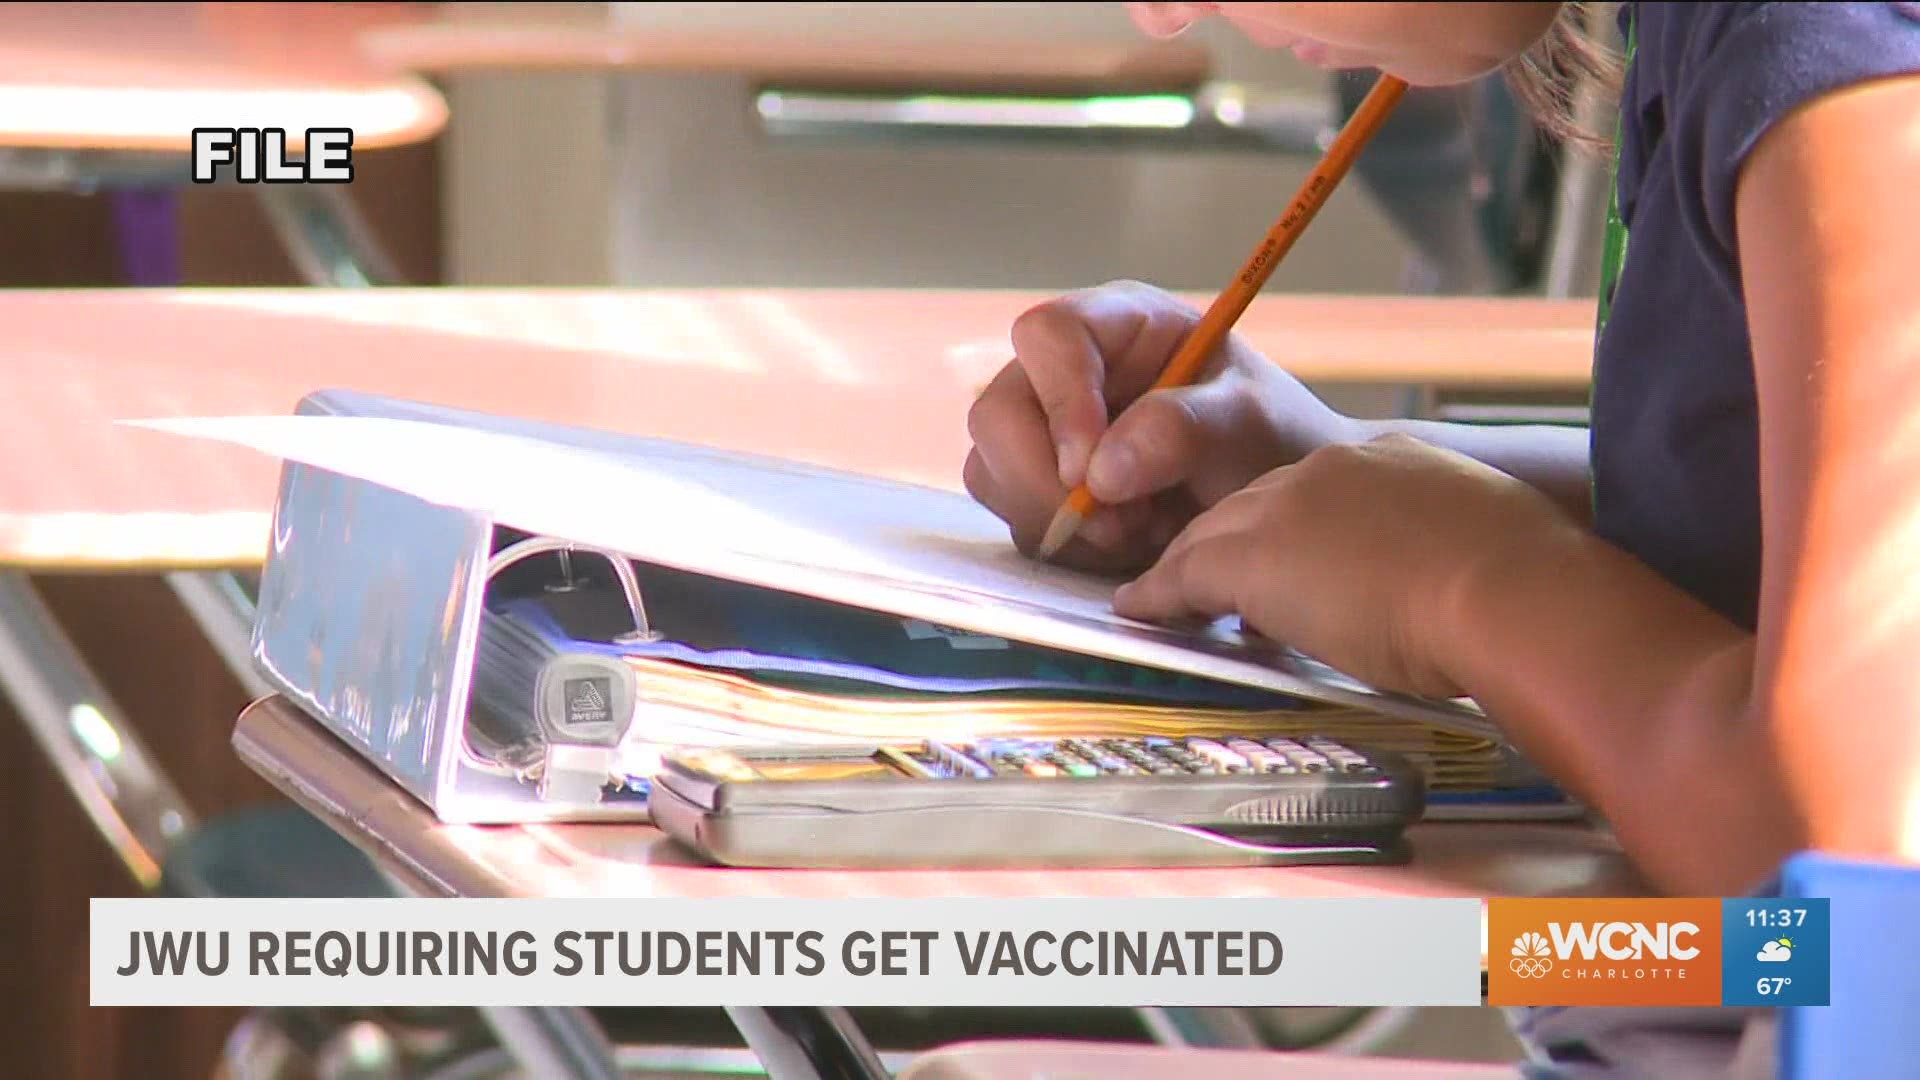 Johnson & Wales University says it will require all students who are on campus to be fully vaccinated before returning to school for the fall semester.